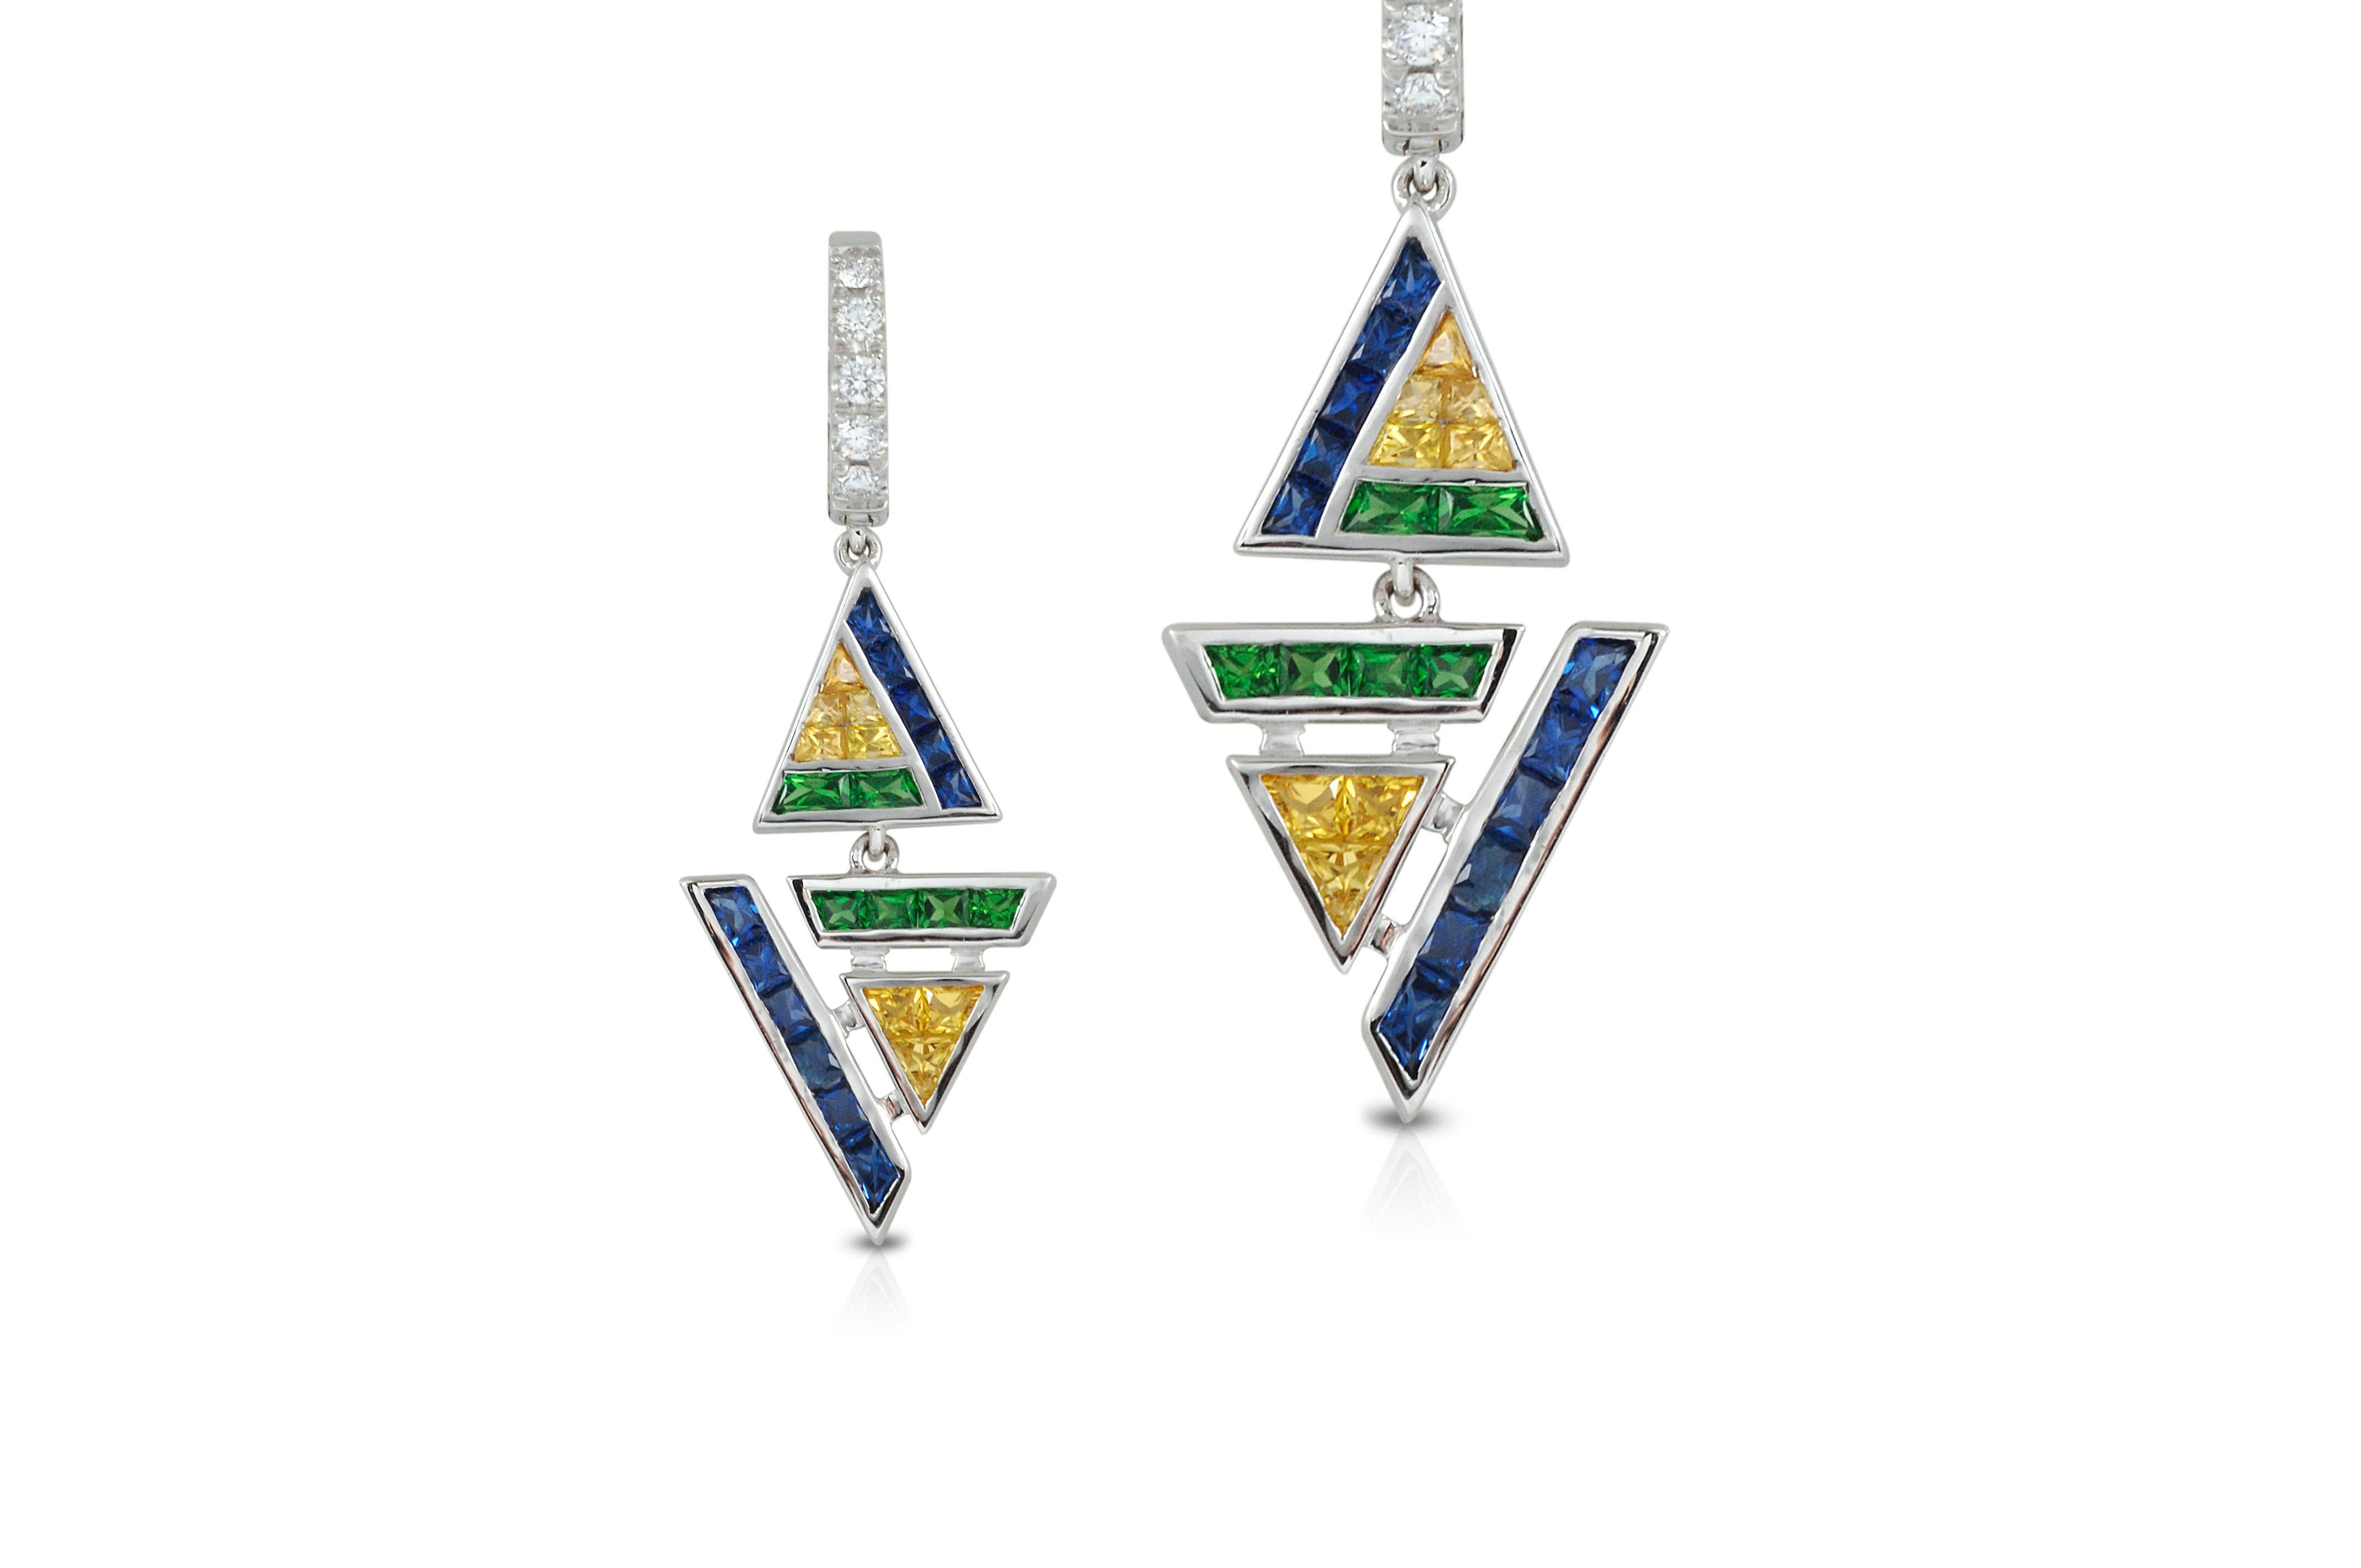 Blue Sapphire1.54 carats, Tsavorite 0.81 carat, Yellow Sapphire 2.04 carats and Diamond 0.18 carat Earrings 18K White Gold

Width: 1.3 cm
Length: 1.6 cm
Weight: 3.07 grams

A striking combination of perfectly cut princess-cut and baguette-cut